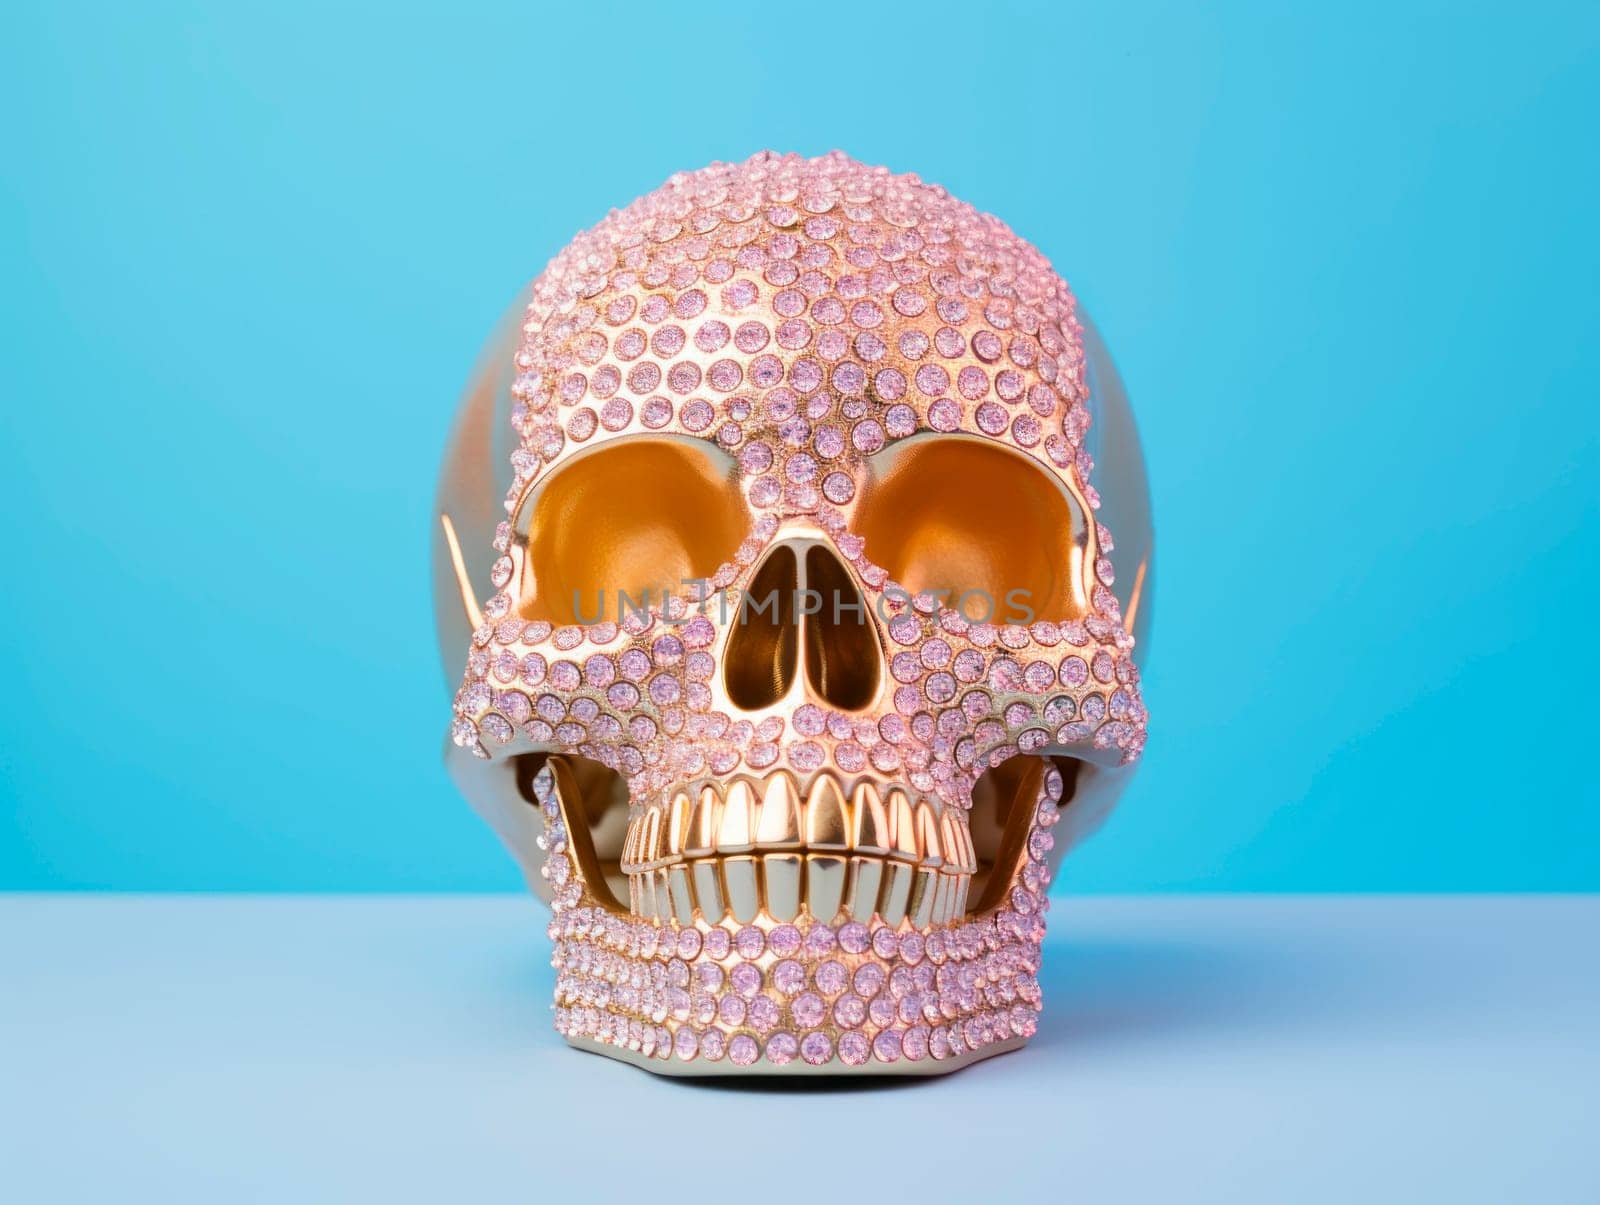 A skull decorated with shiny rhinestones on a bright background by Spirina